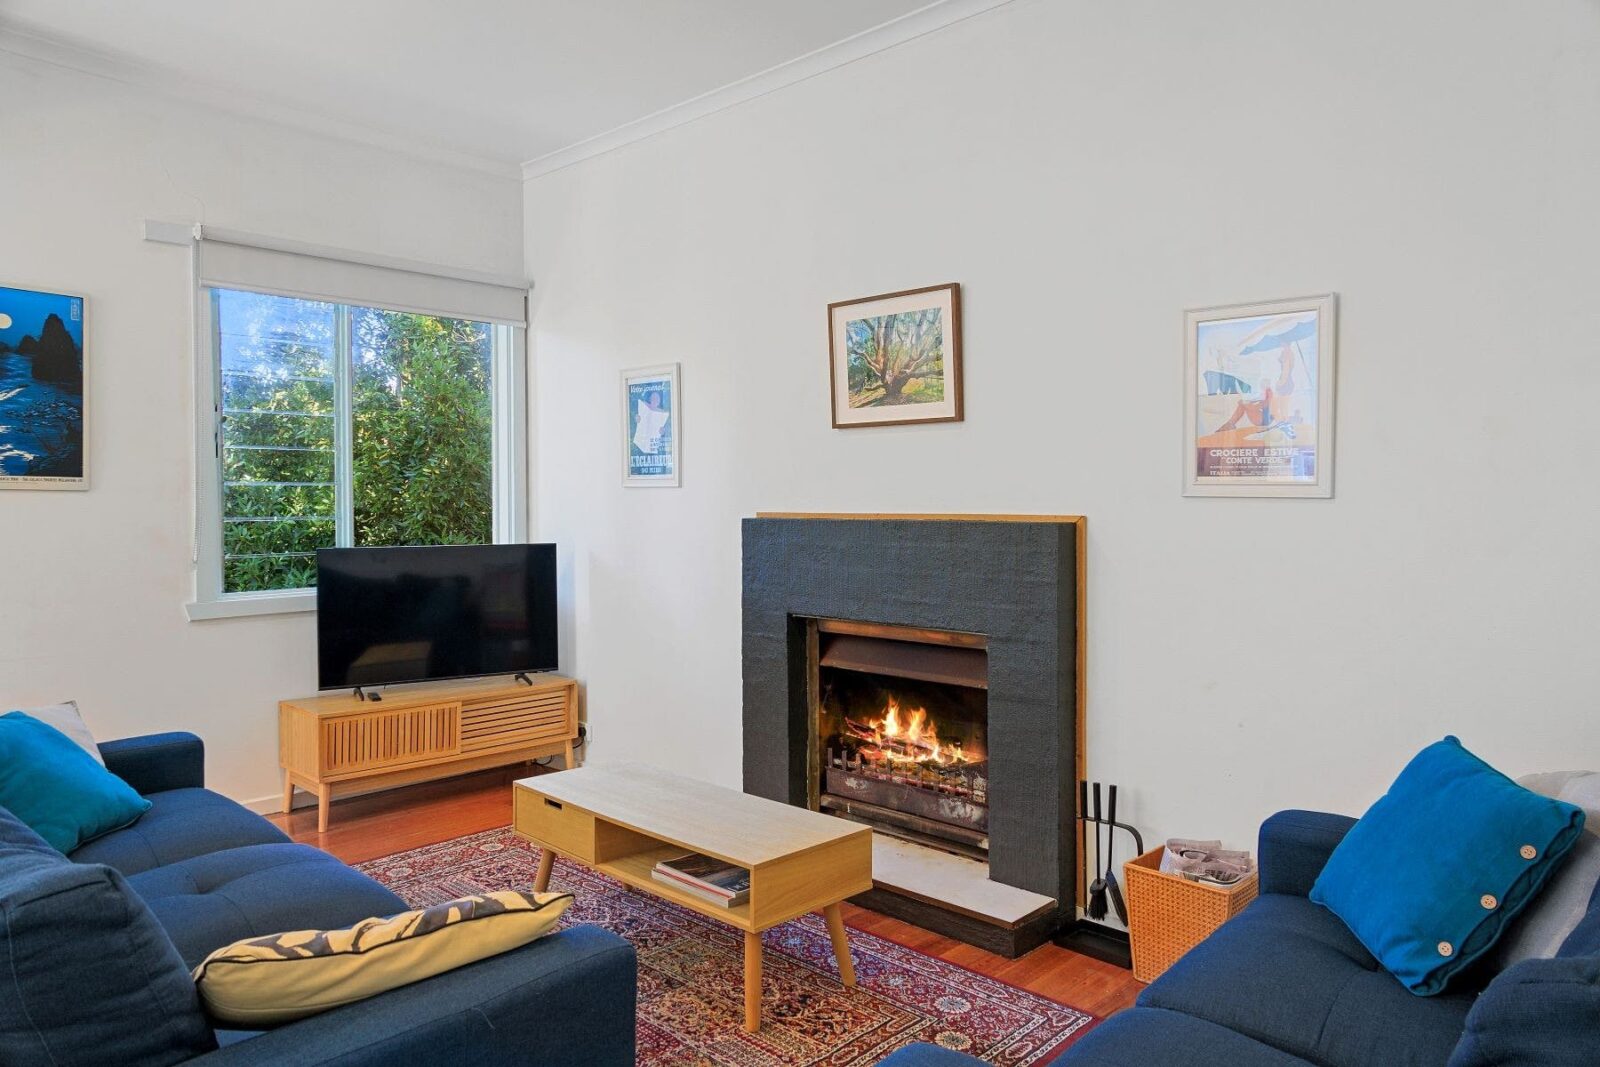 Lounge room with an open fireplace and two comfortable couches. Television beside window